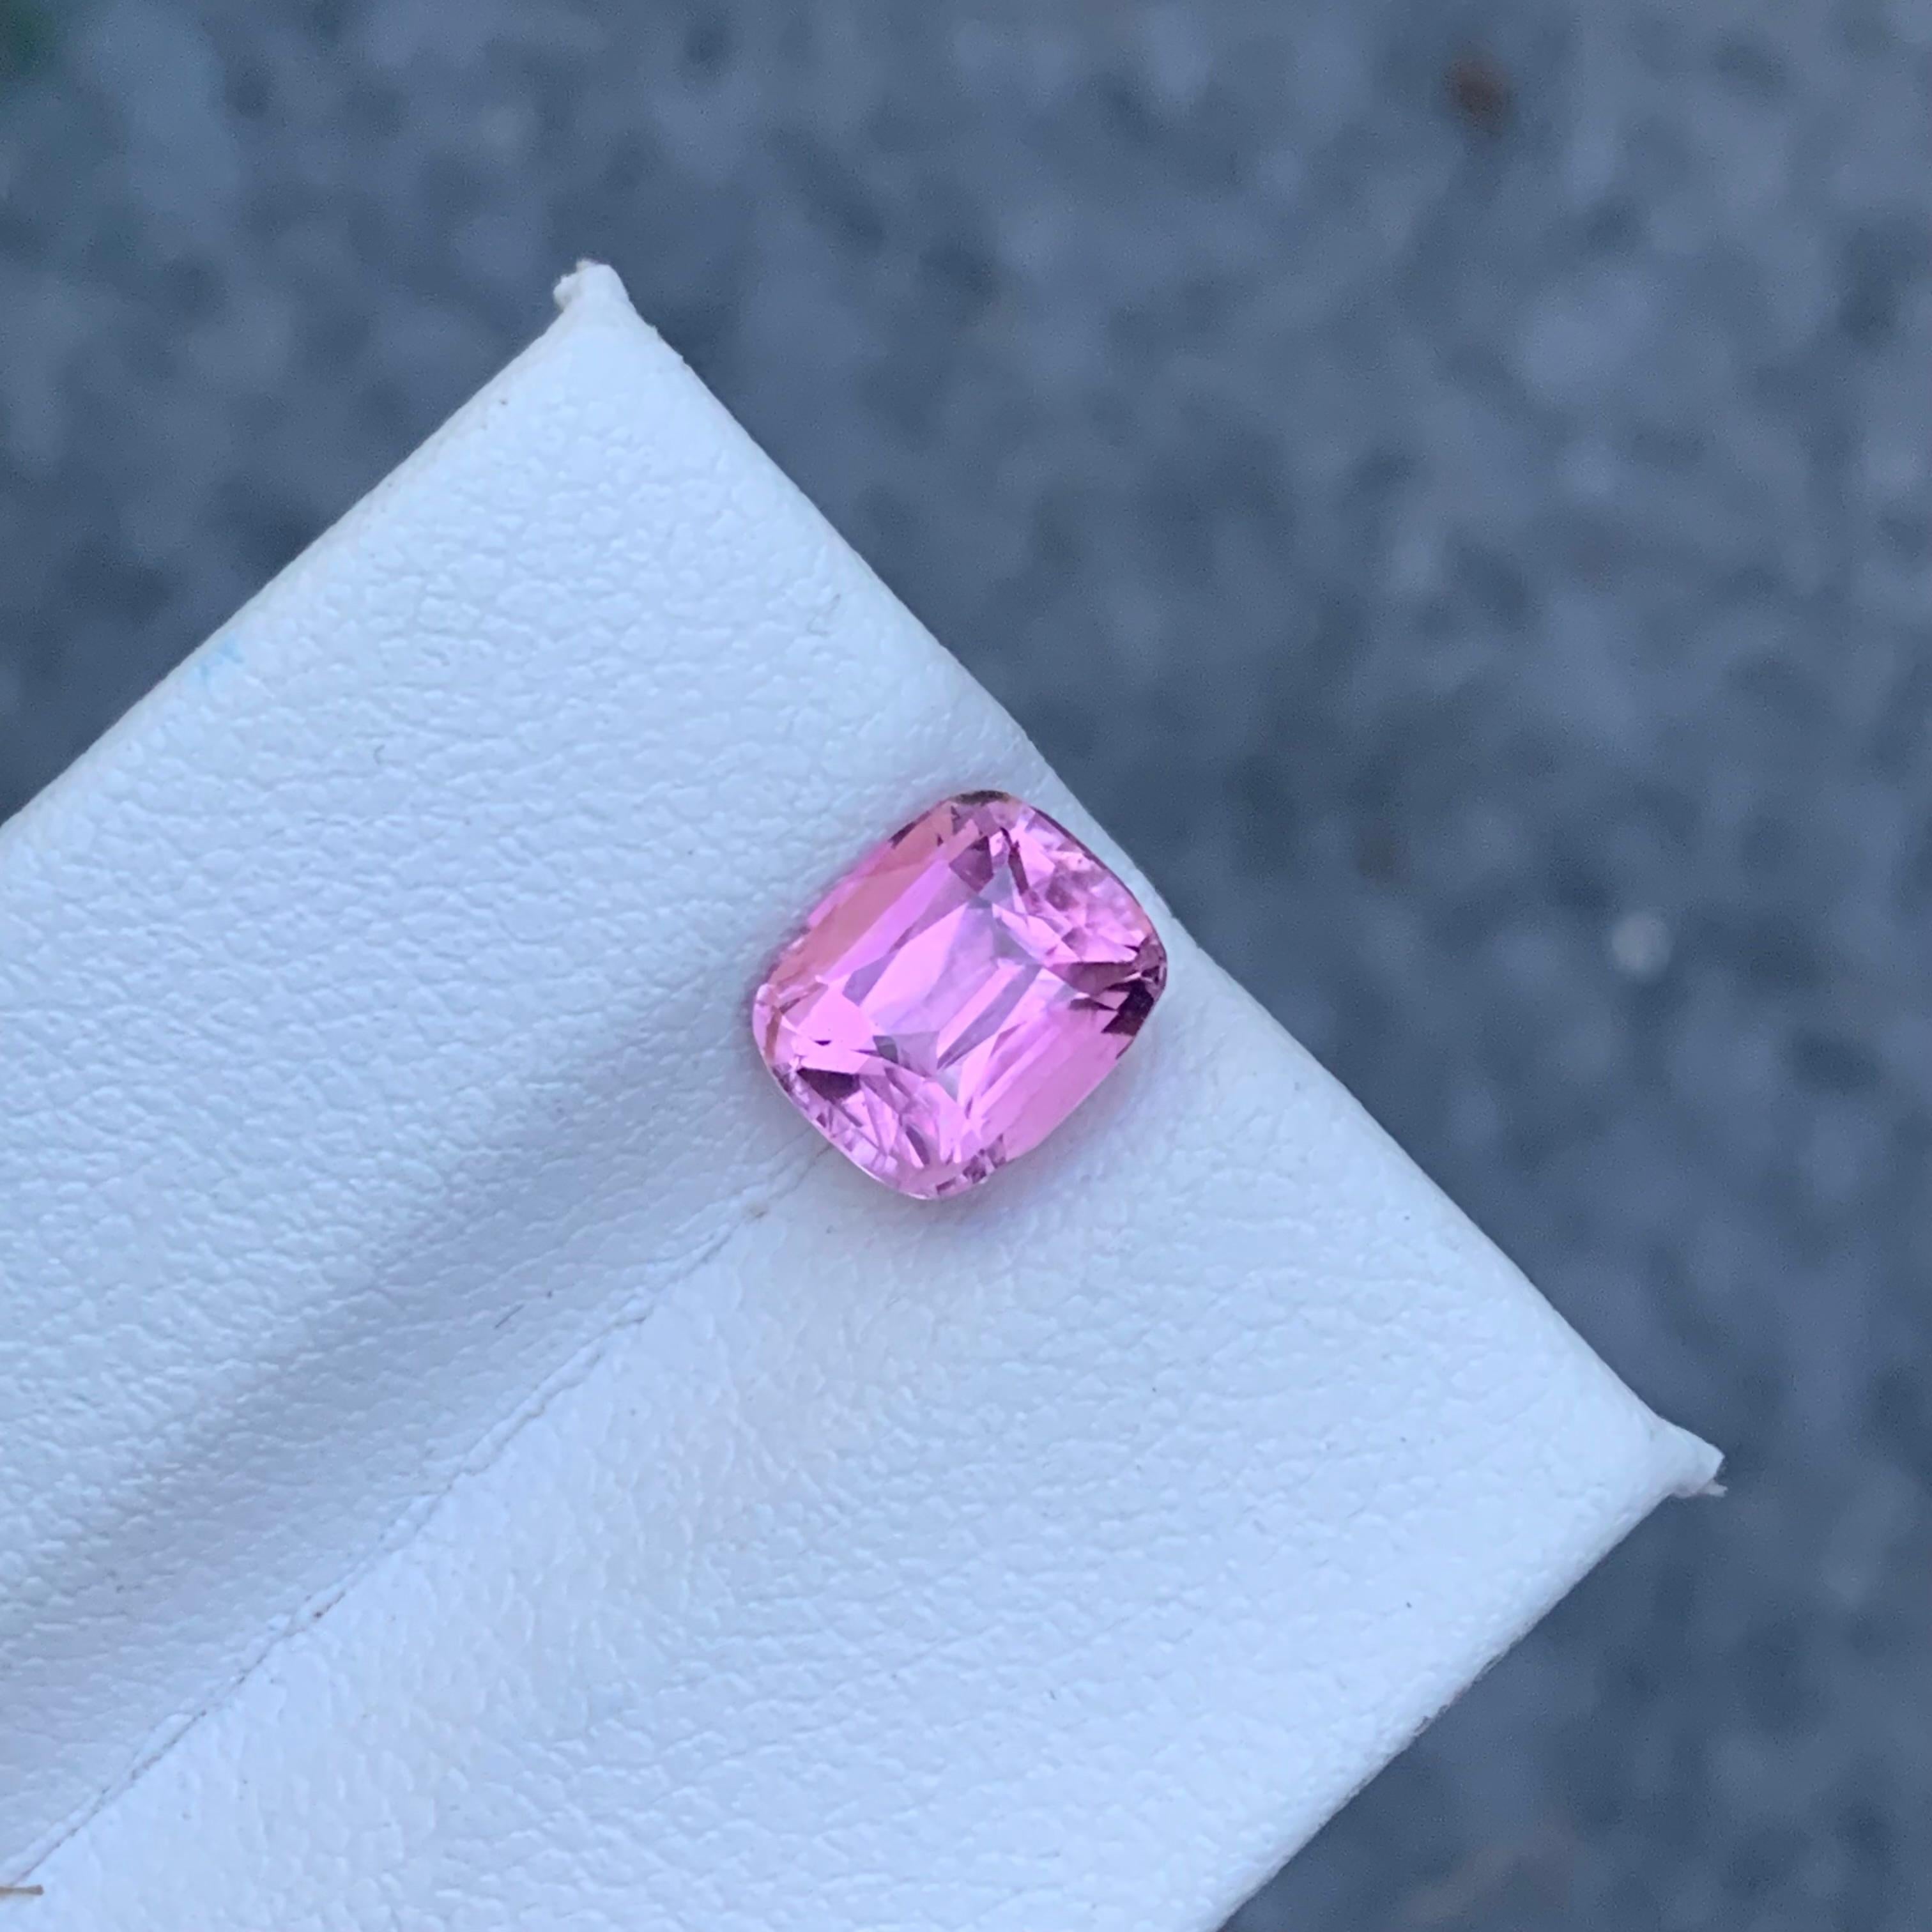 Faceted Tourmaline
Weight: 2.15 Carats
Dimension: 7.9x6.6x5.5 Mm
Origin: Kunar Afghanistan
Color: Pink
Shape: Cushion
Clarity: Eye Clean
Certificate: On Demand

With a rating between 7 and 7.5 on the Mohs scale of mineral hardness, tourmaline